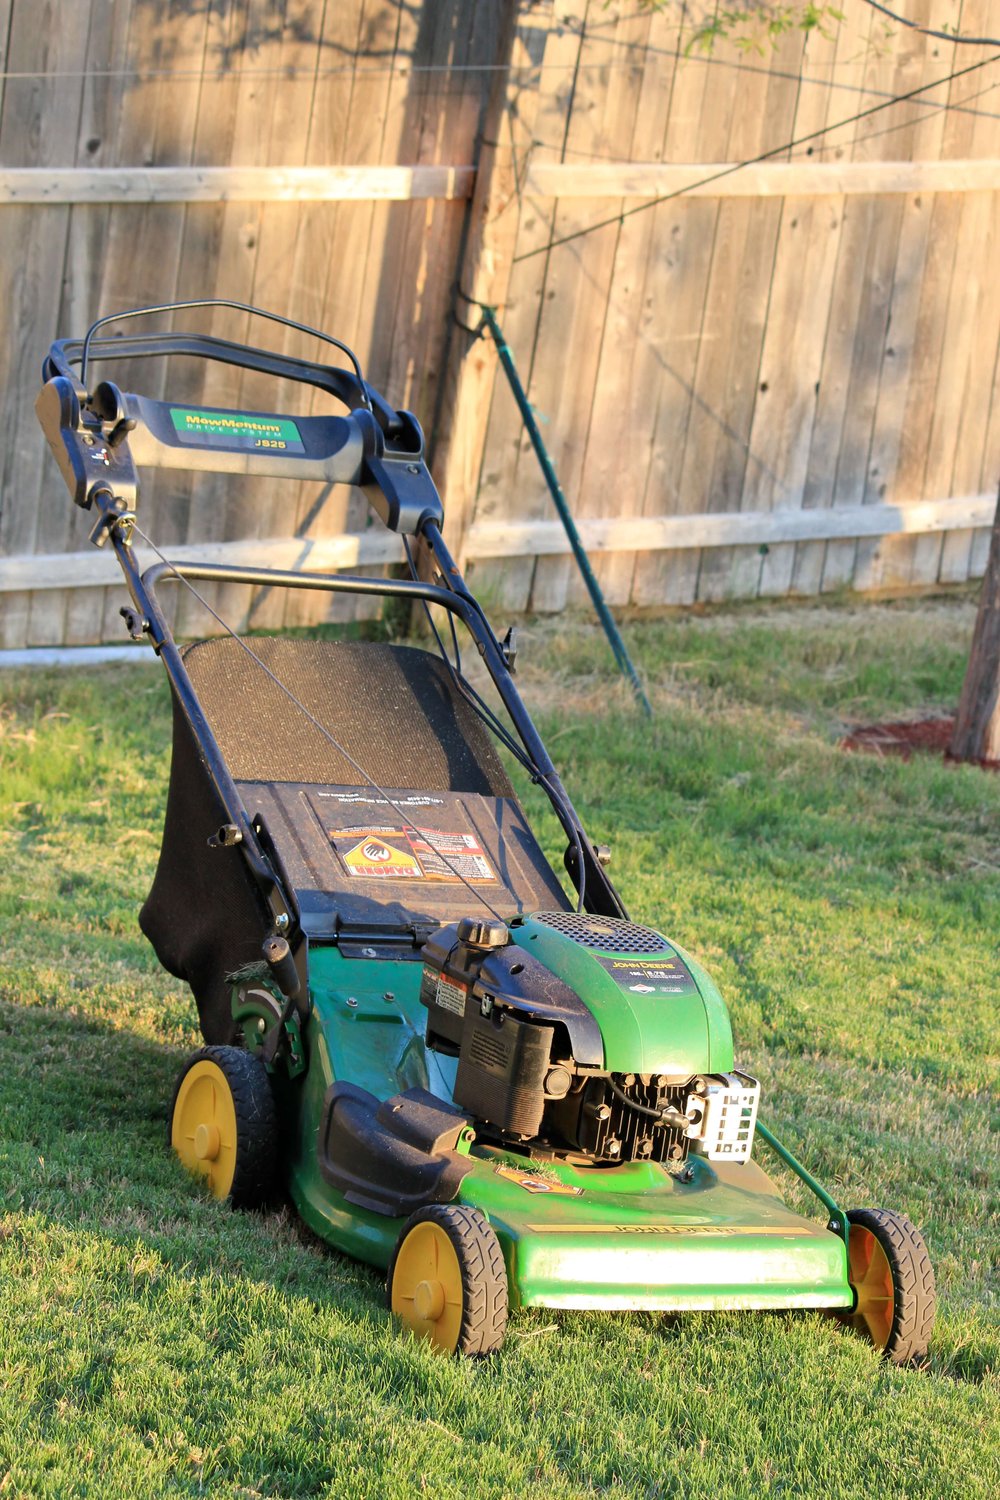 How to Prepare Your Lawn Care Equipment for Spring